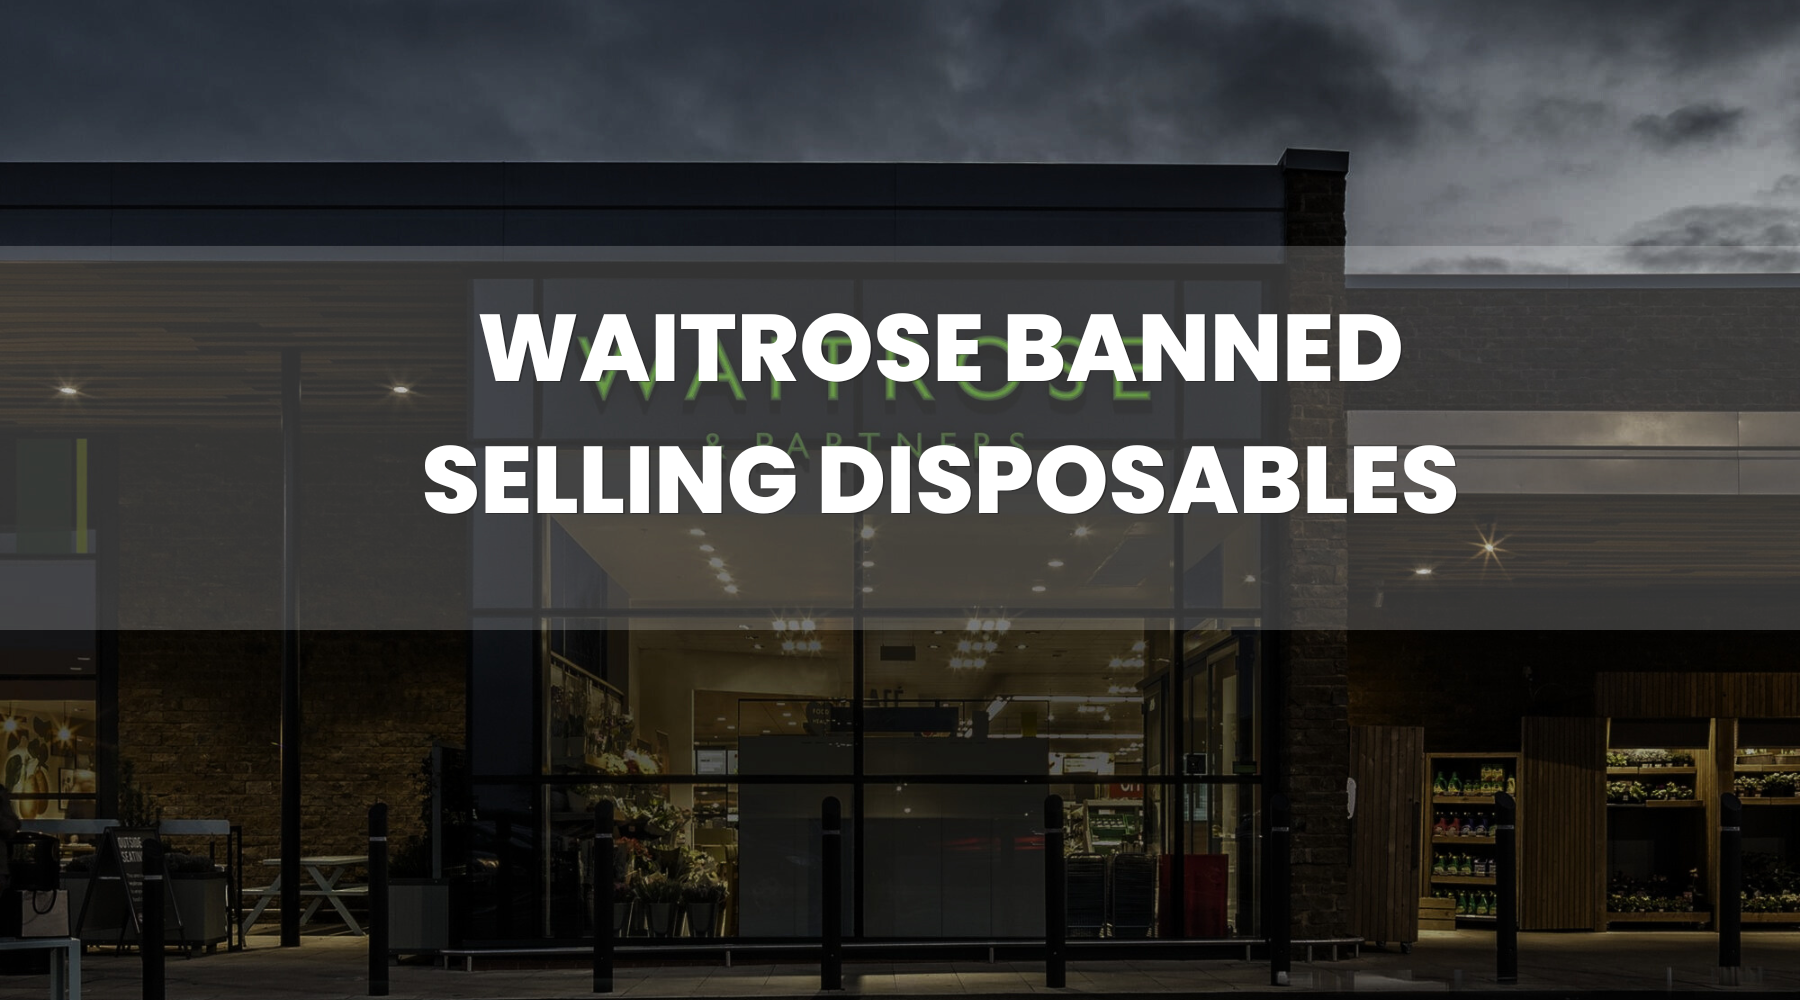 Waitrose Banned Selling Disposable Vapes in Their Stores in January 2023.